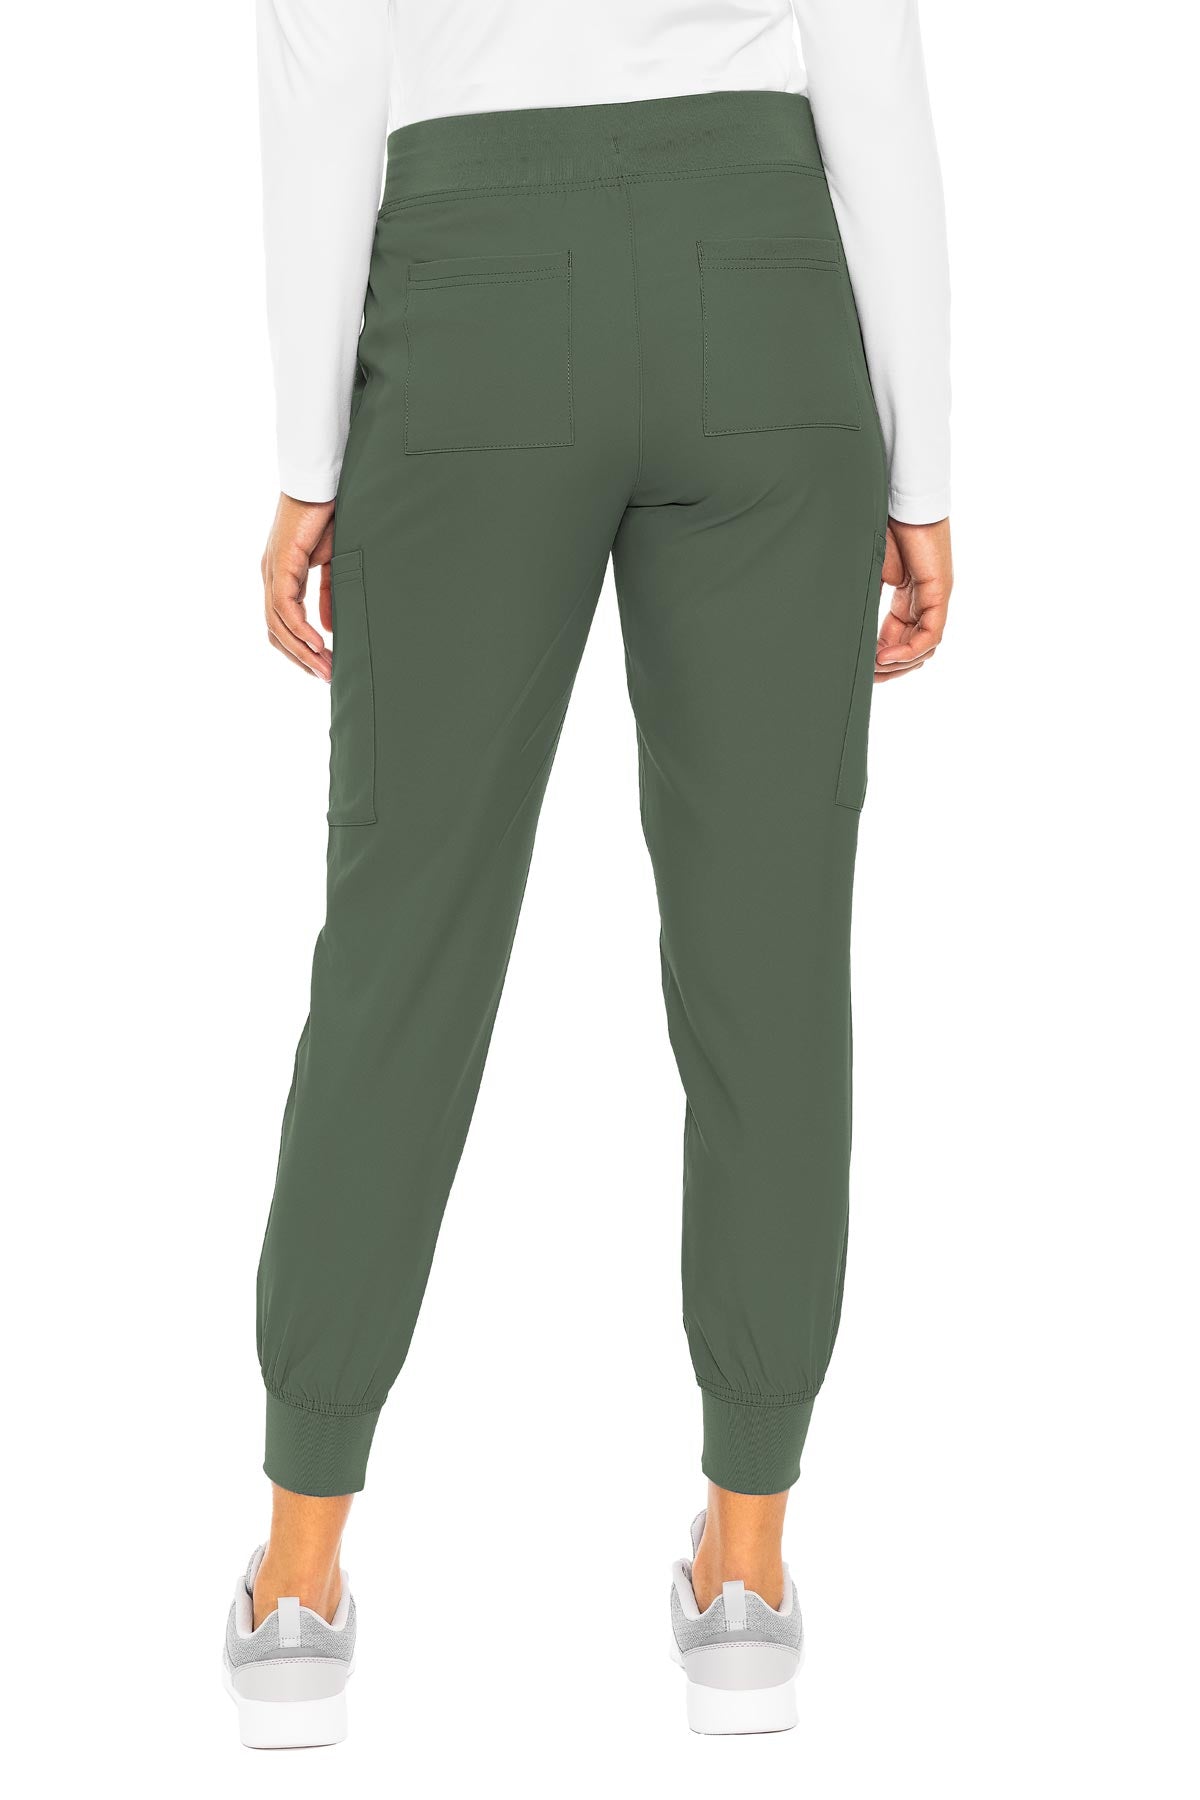 Med Couture 2711 Insight Jogger Pant Olive Back